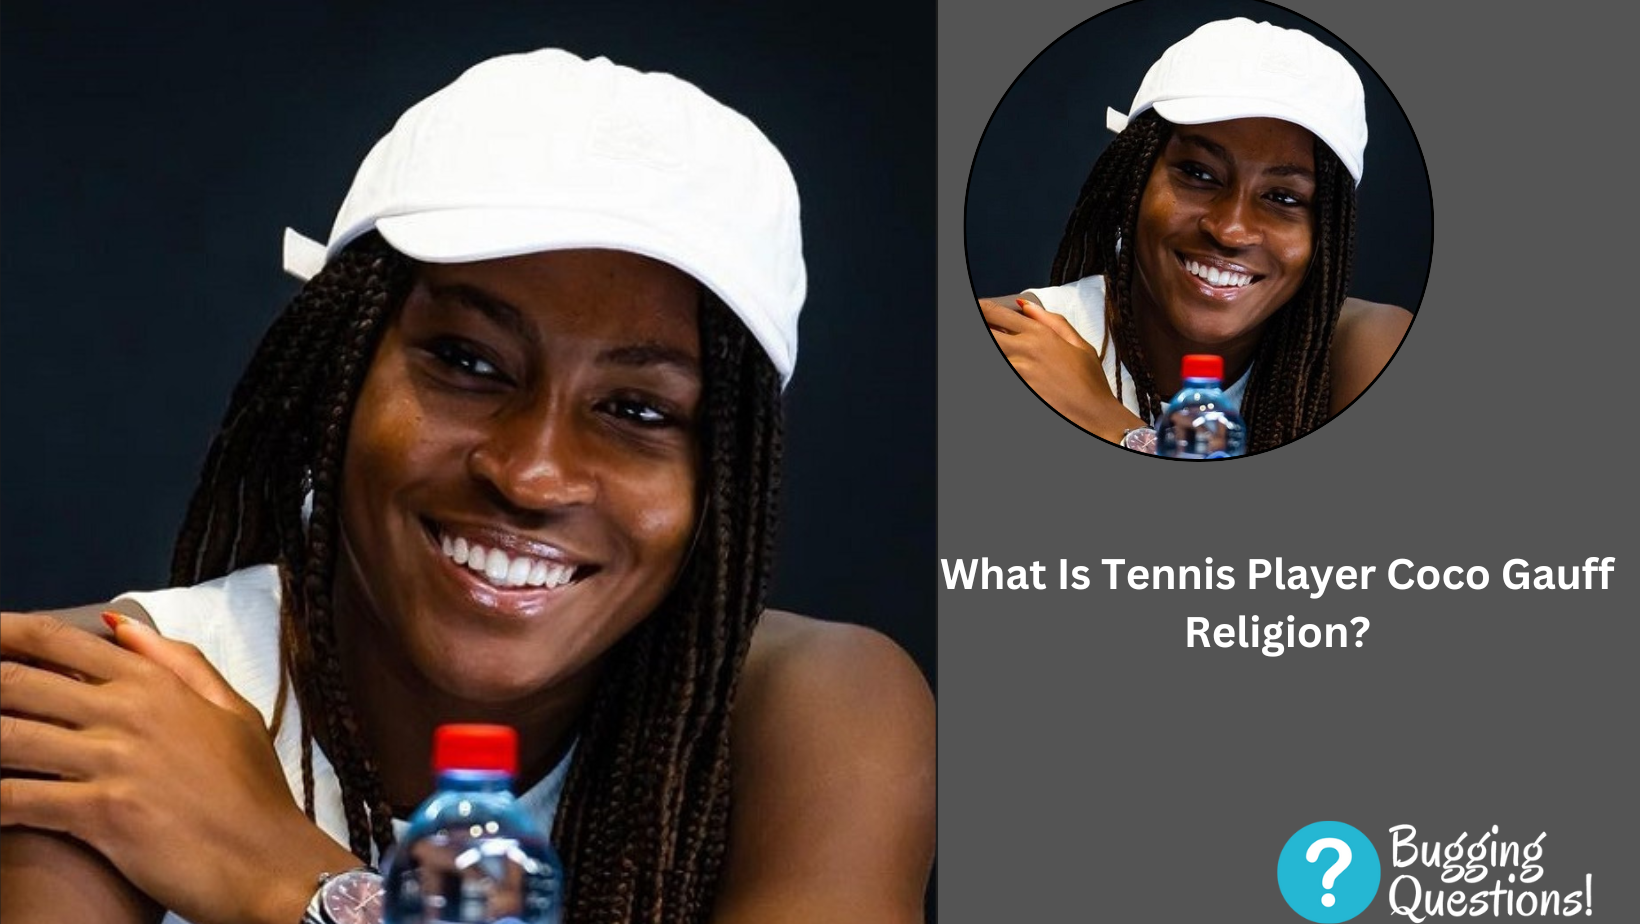 What Is Tennis Player Coco Gauff Religion?